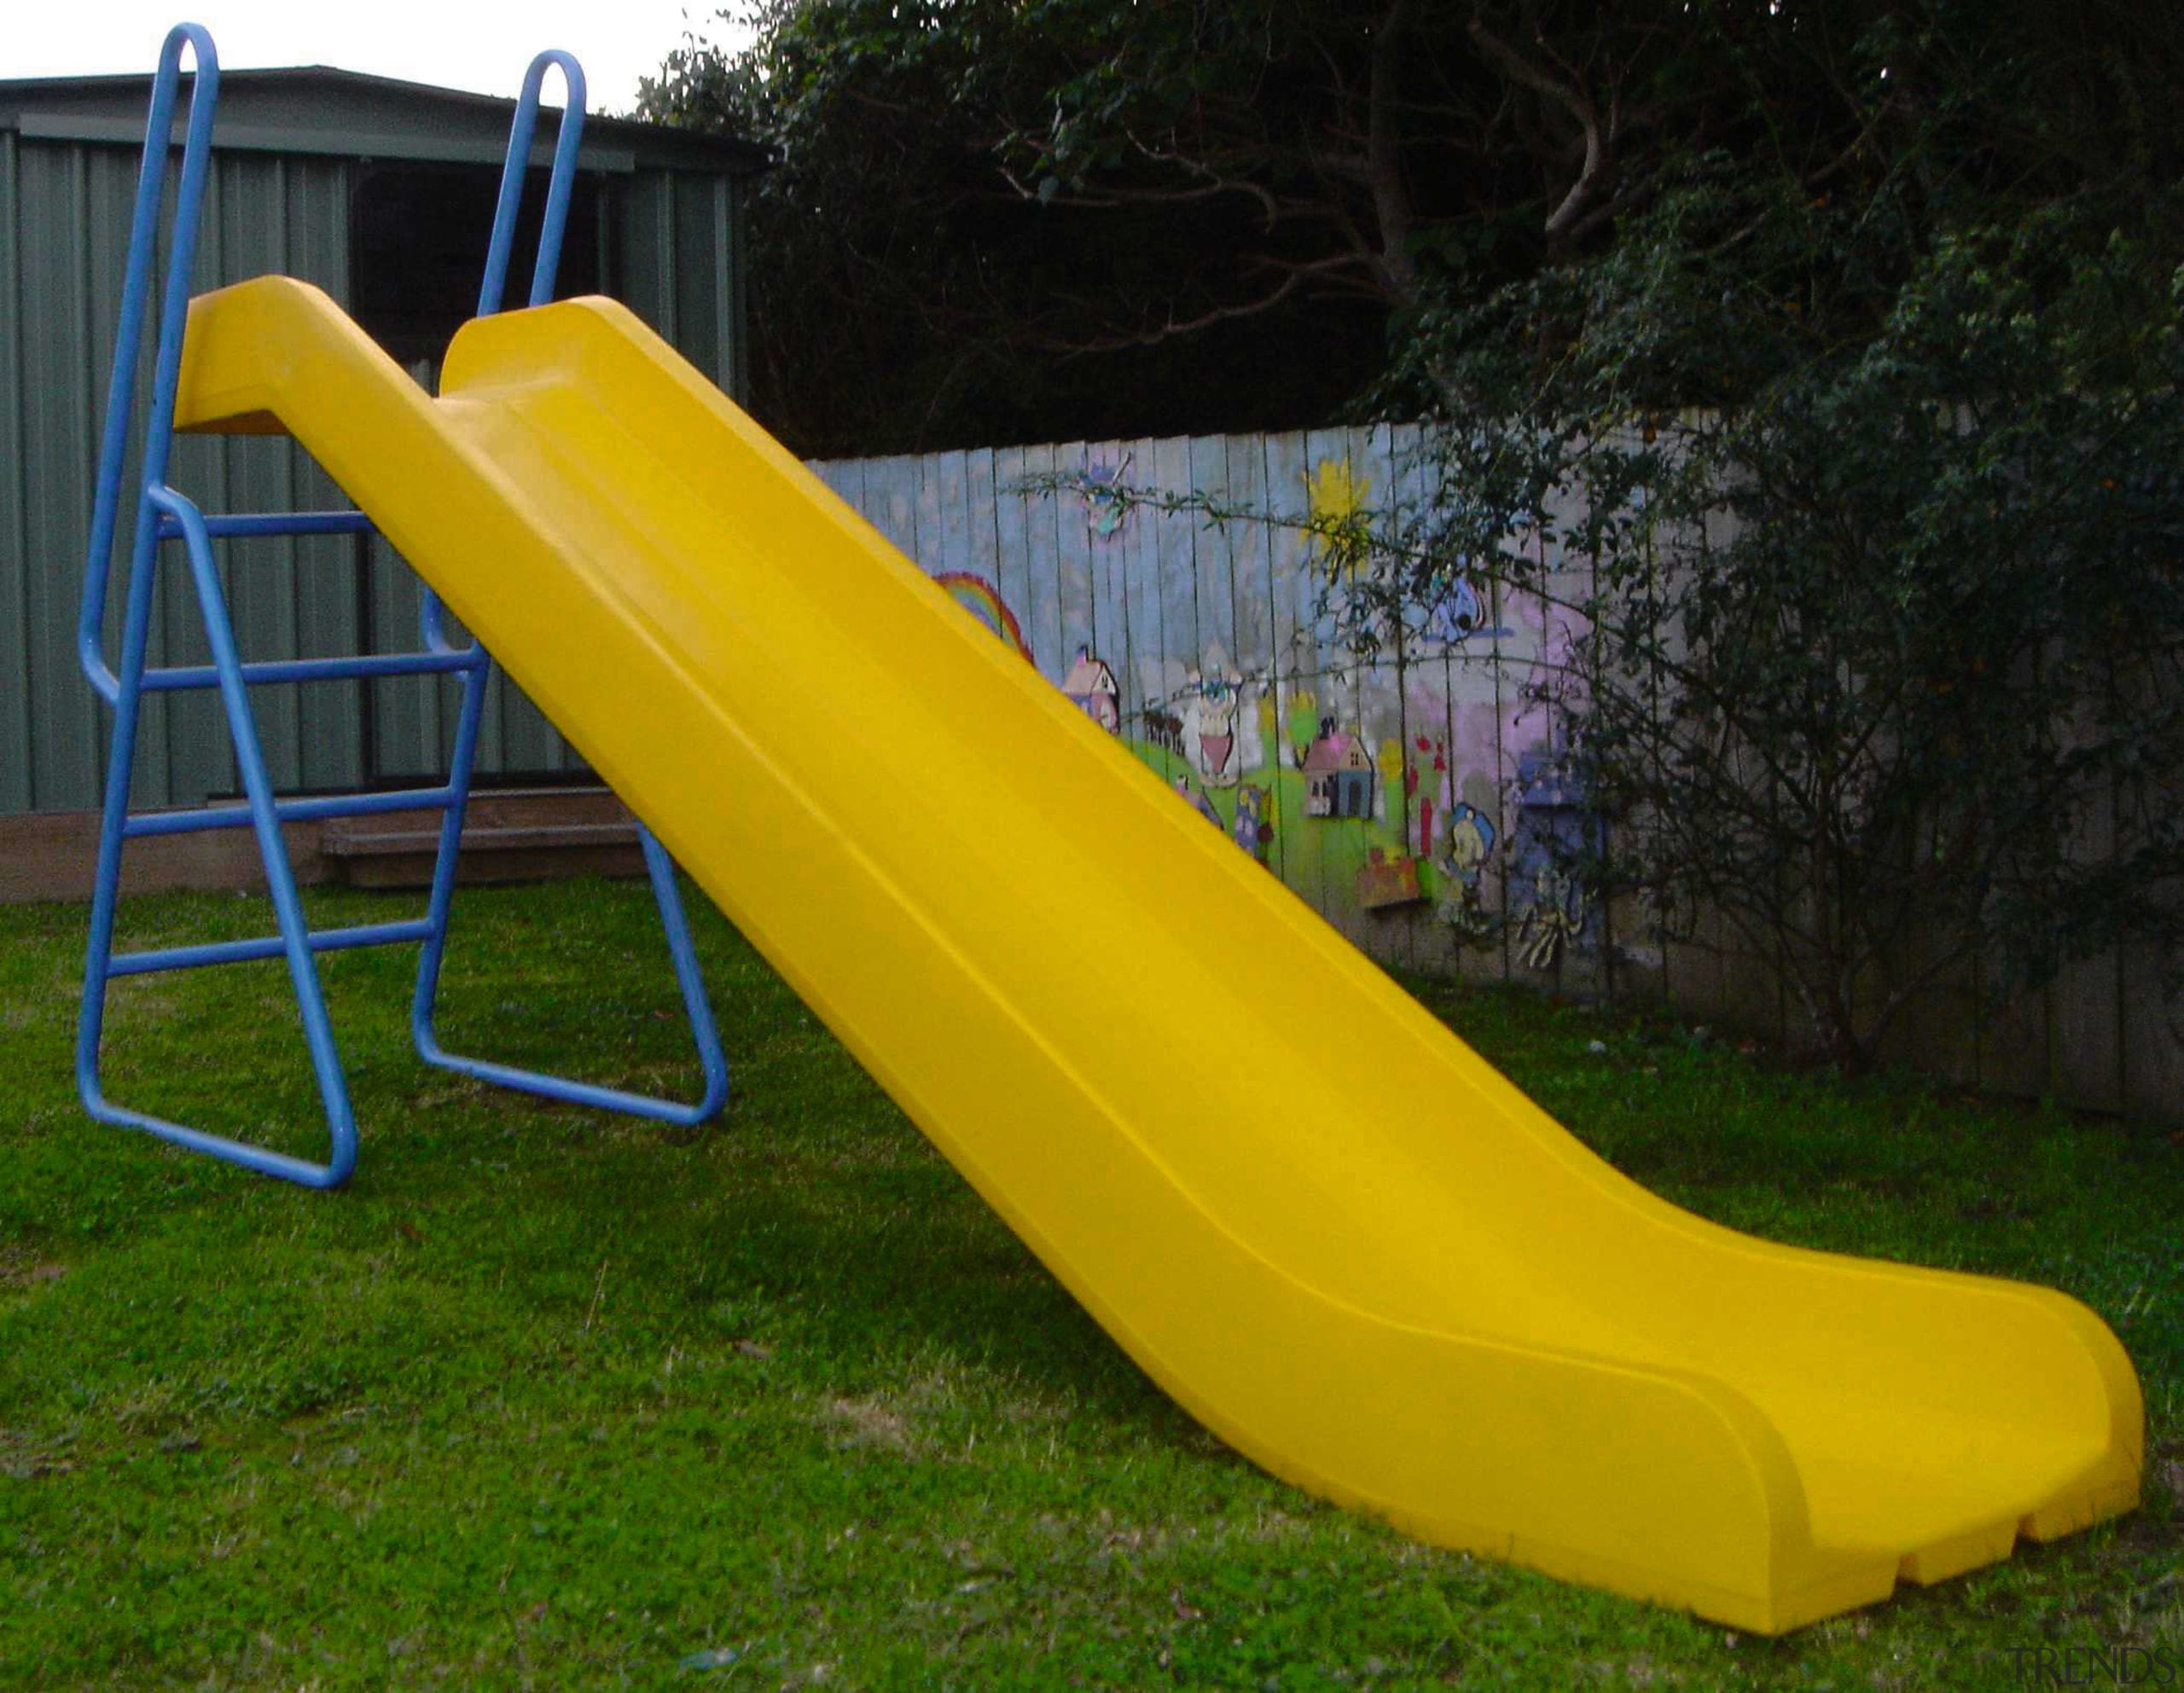 Bright yellow play slide with blue ladder. - chute, leisure, outdoor furniture, outdoor play equipment, playground slide, yellow, black, brown